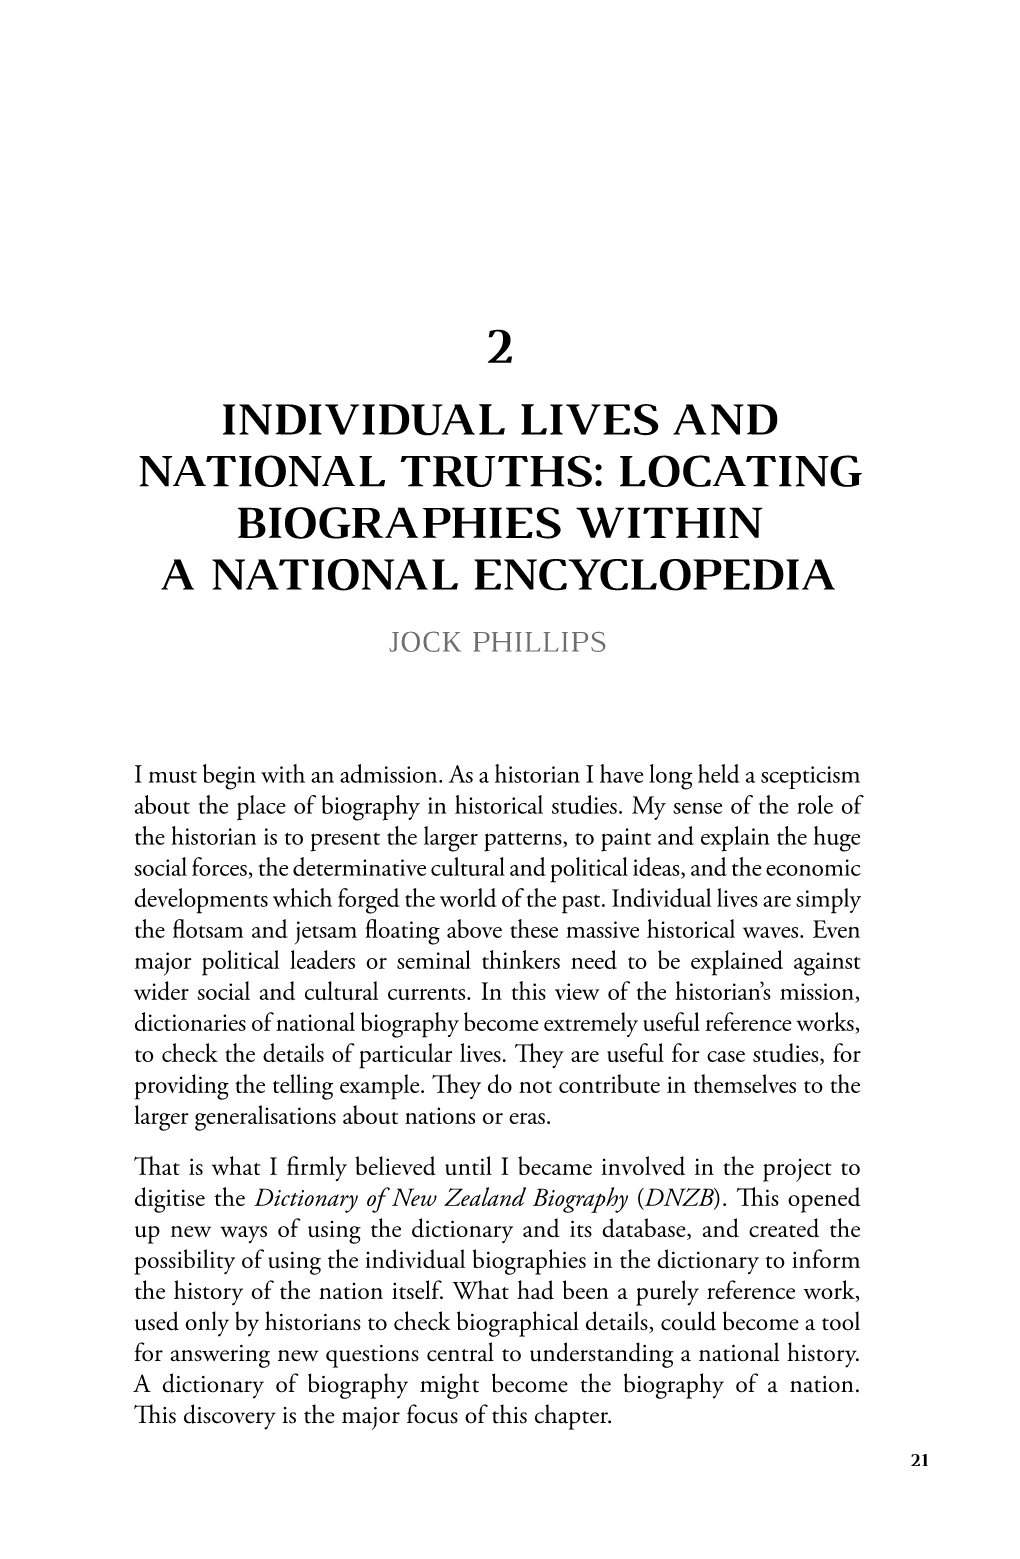 Locating Biographies Within a National Encyclopedia Jock Phillips